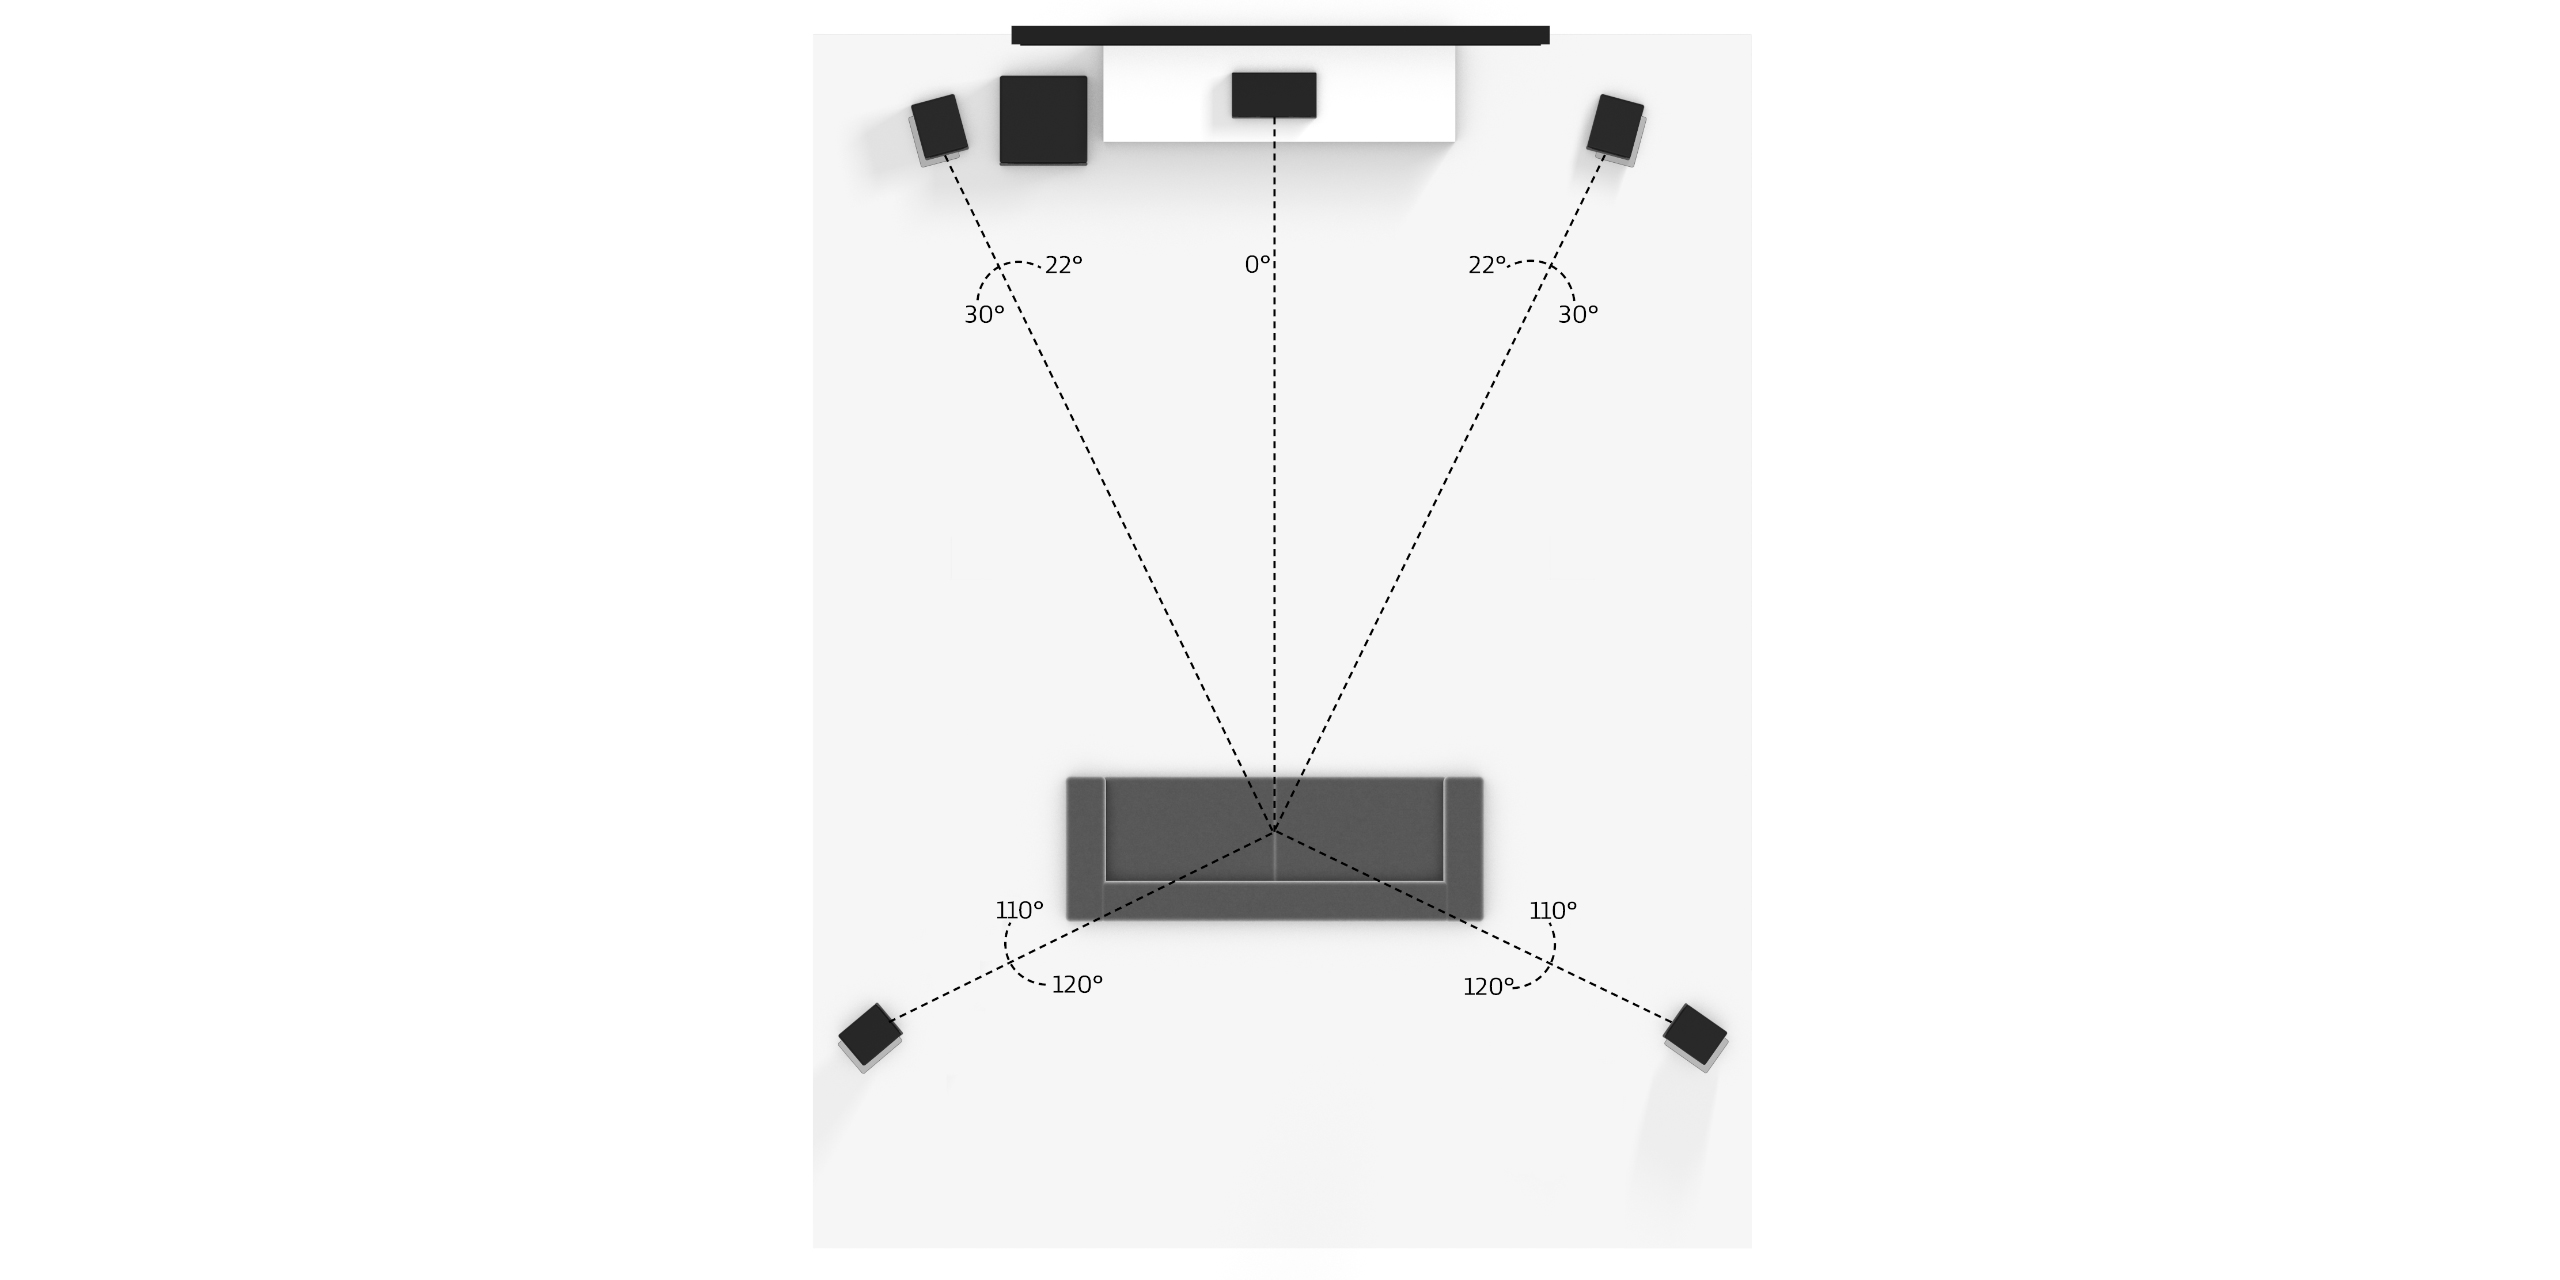 dolby atmos speaker placement 7.1.4 speaker placement